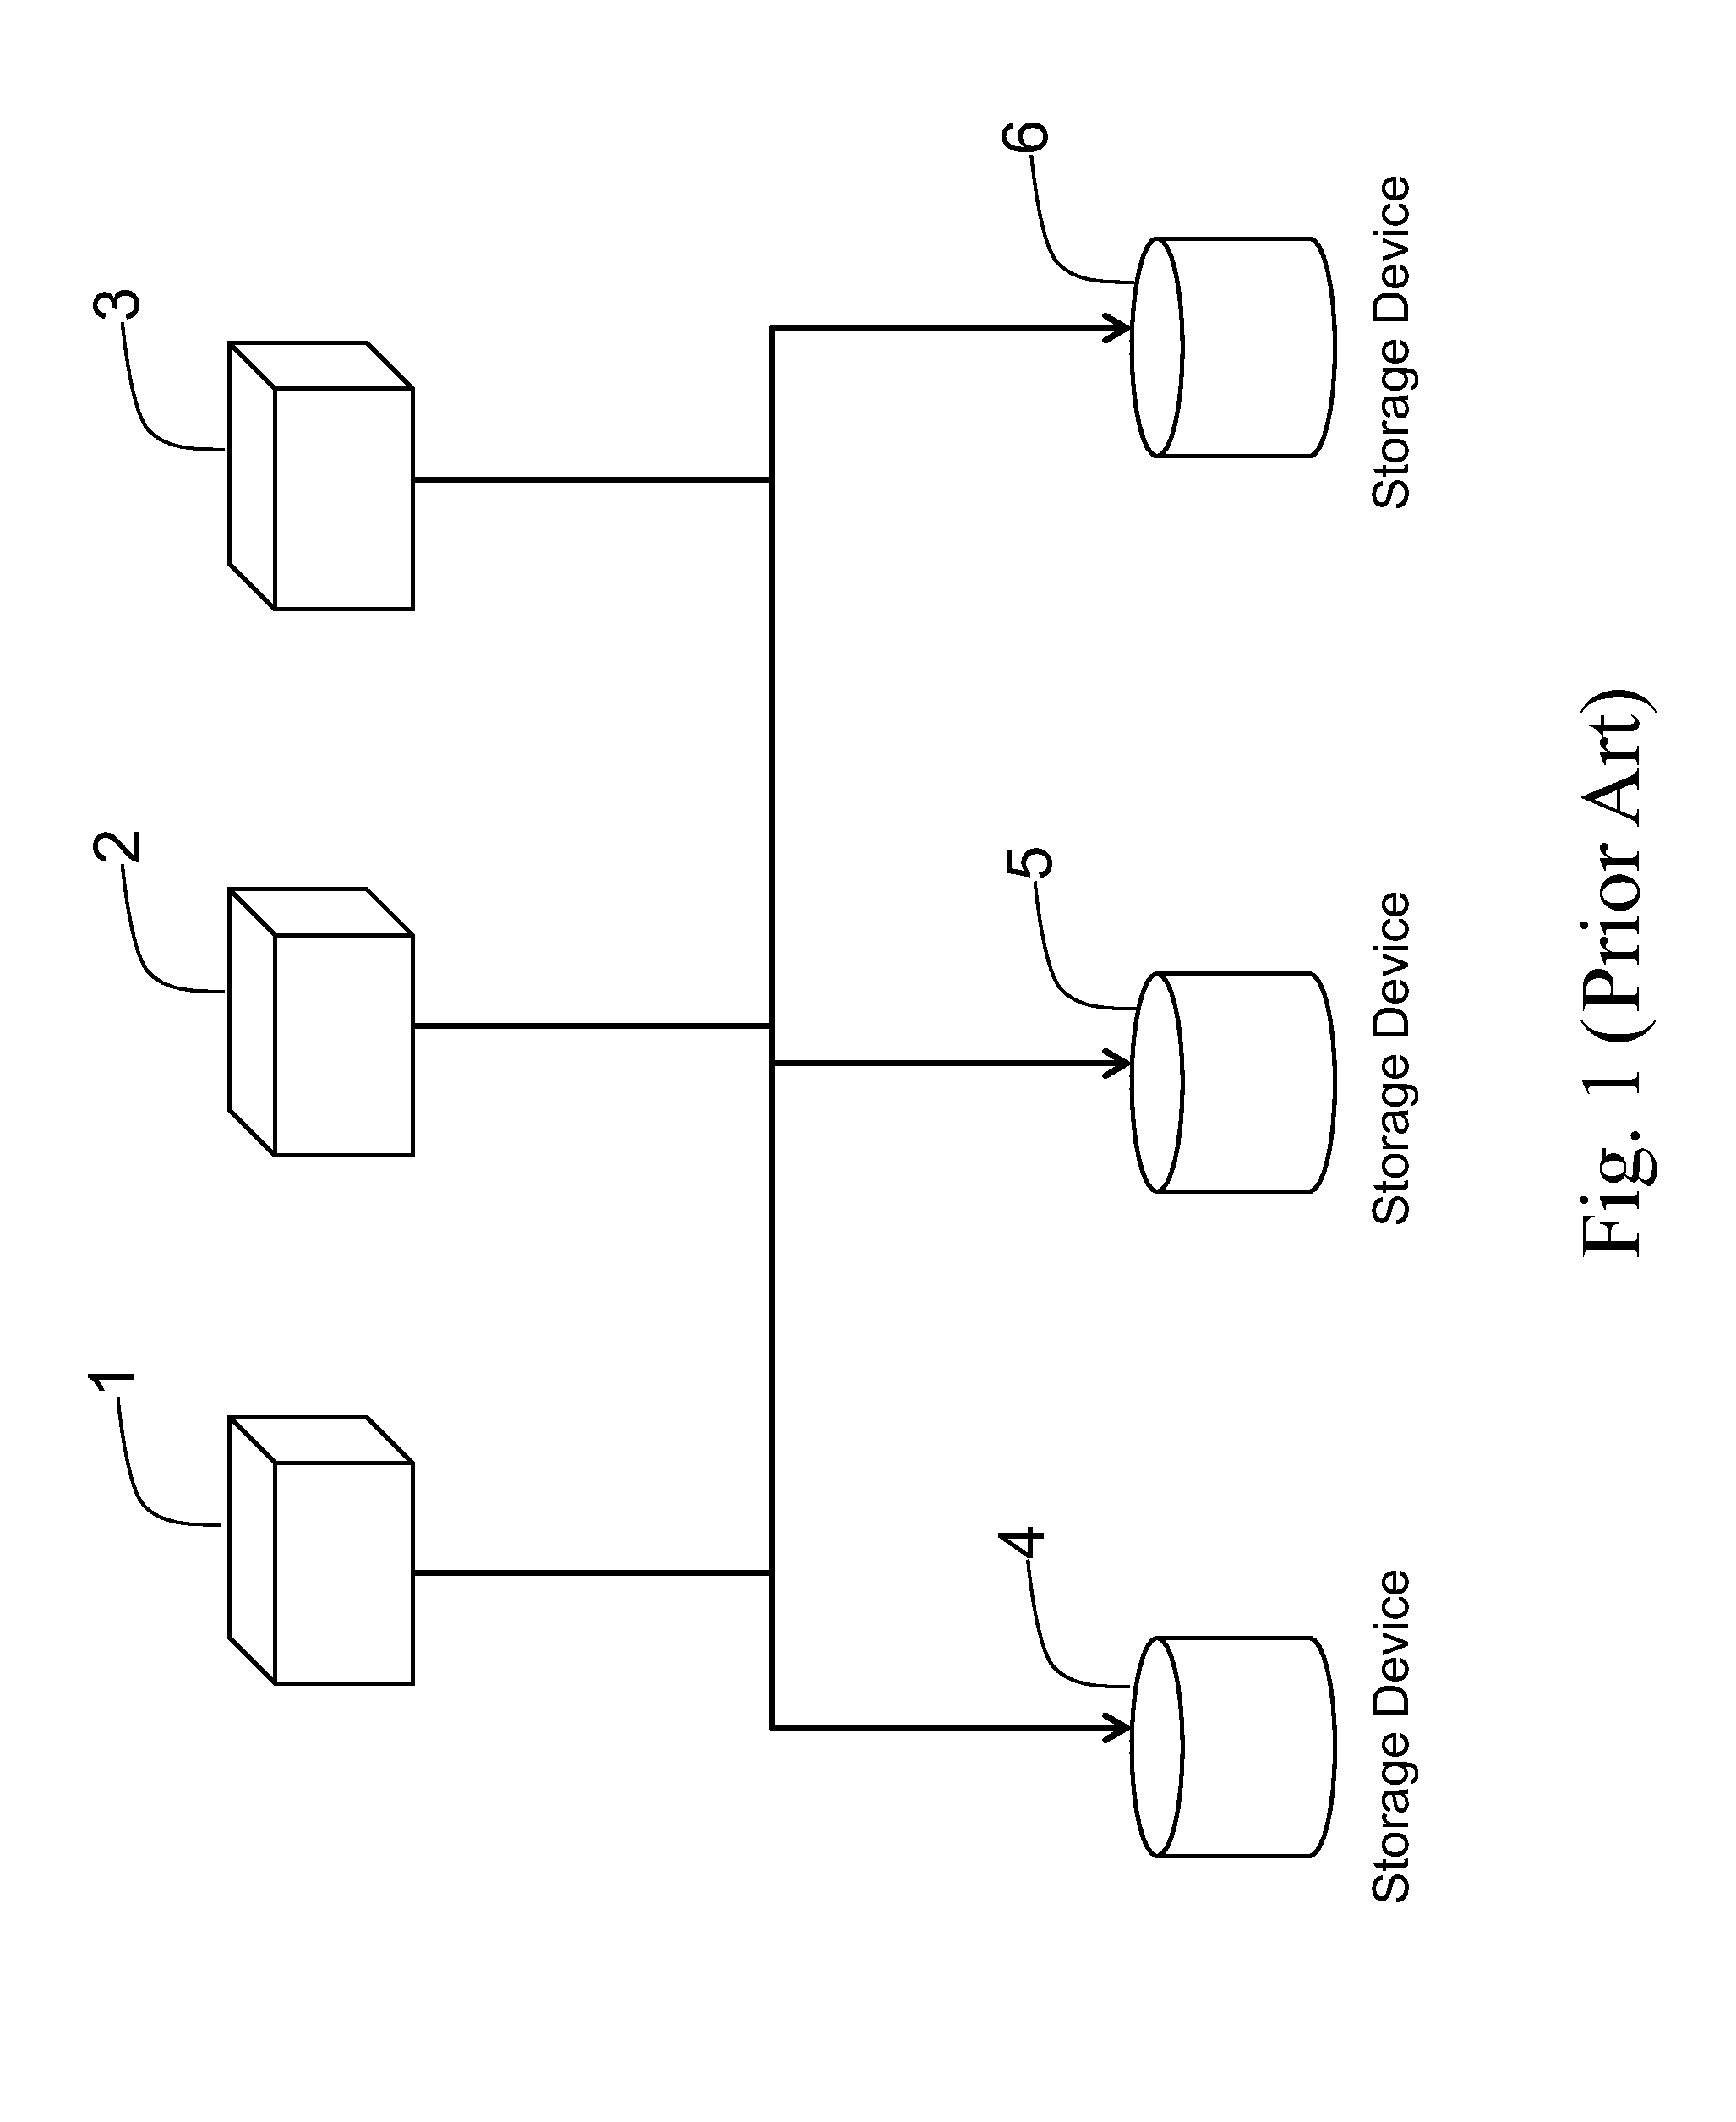 Storage system having node with light weight container